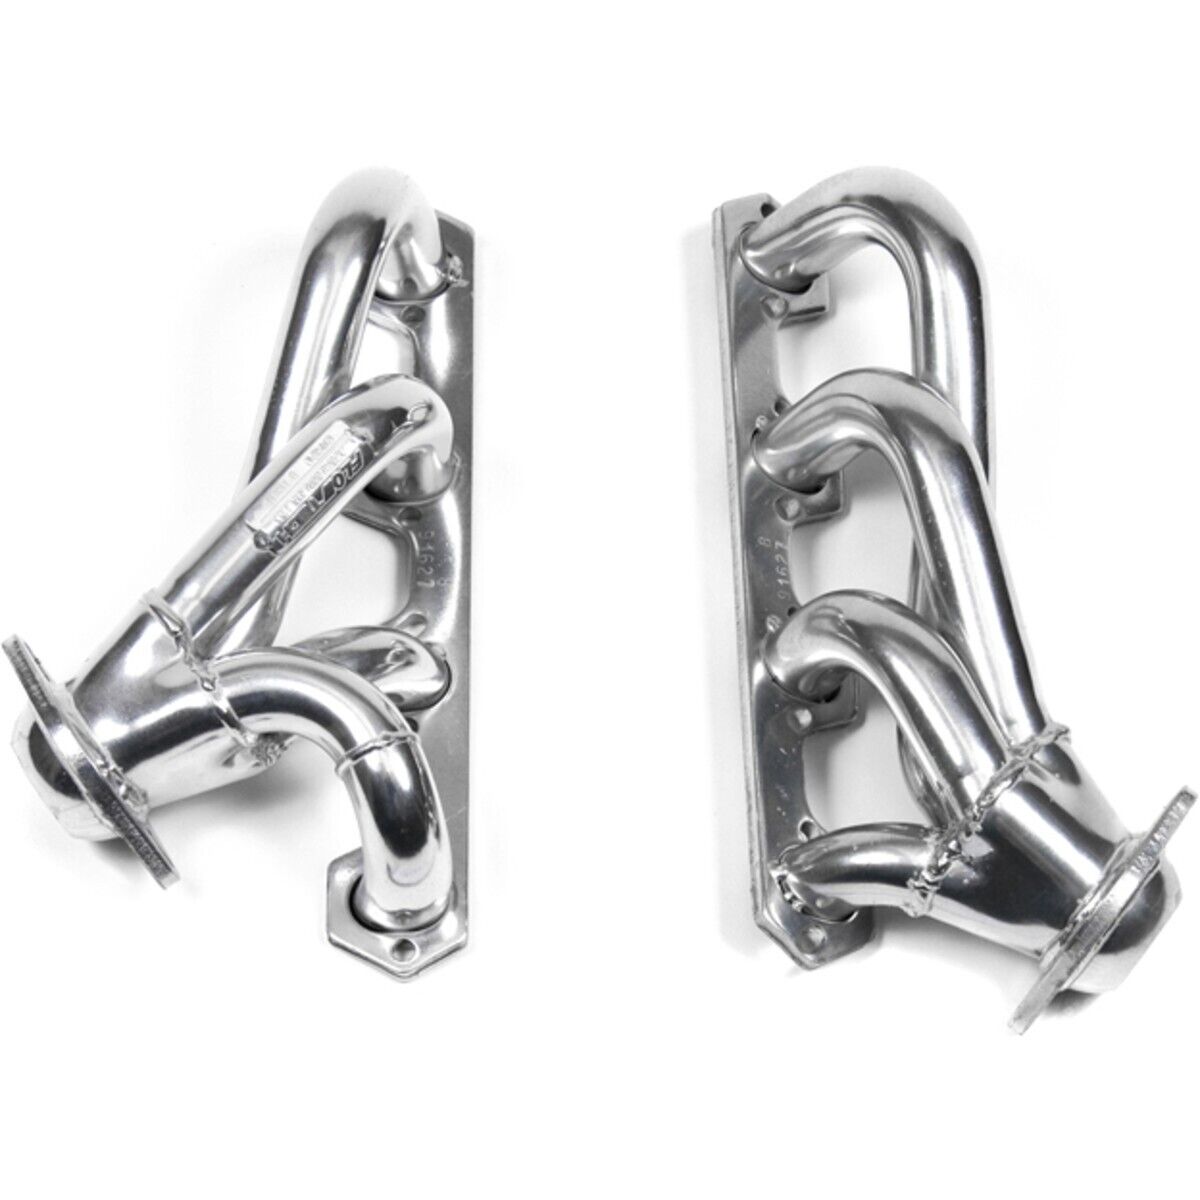 91627-1FLT Flowtech Headers Set of 2 for F150 Truck F250 Ford F-150 F-250 Pair